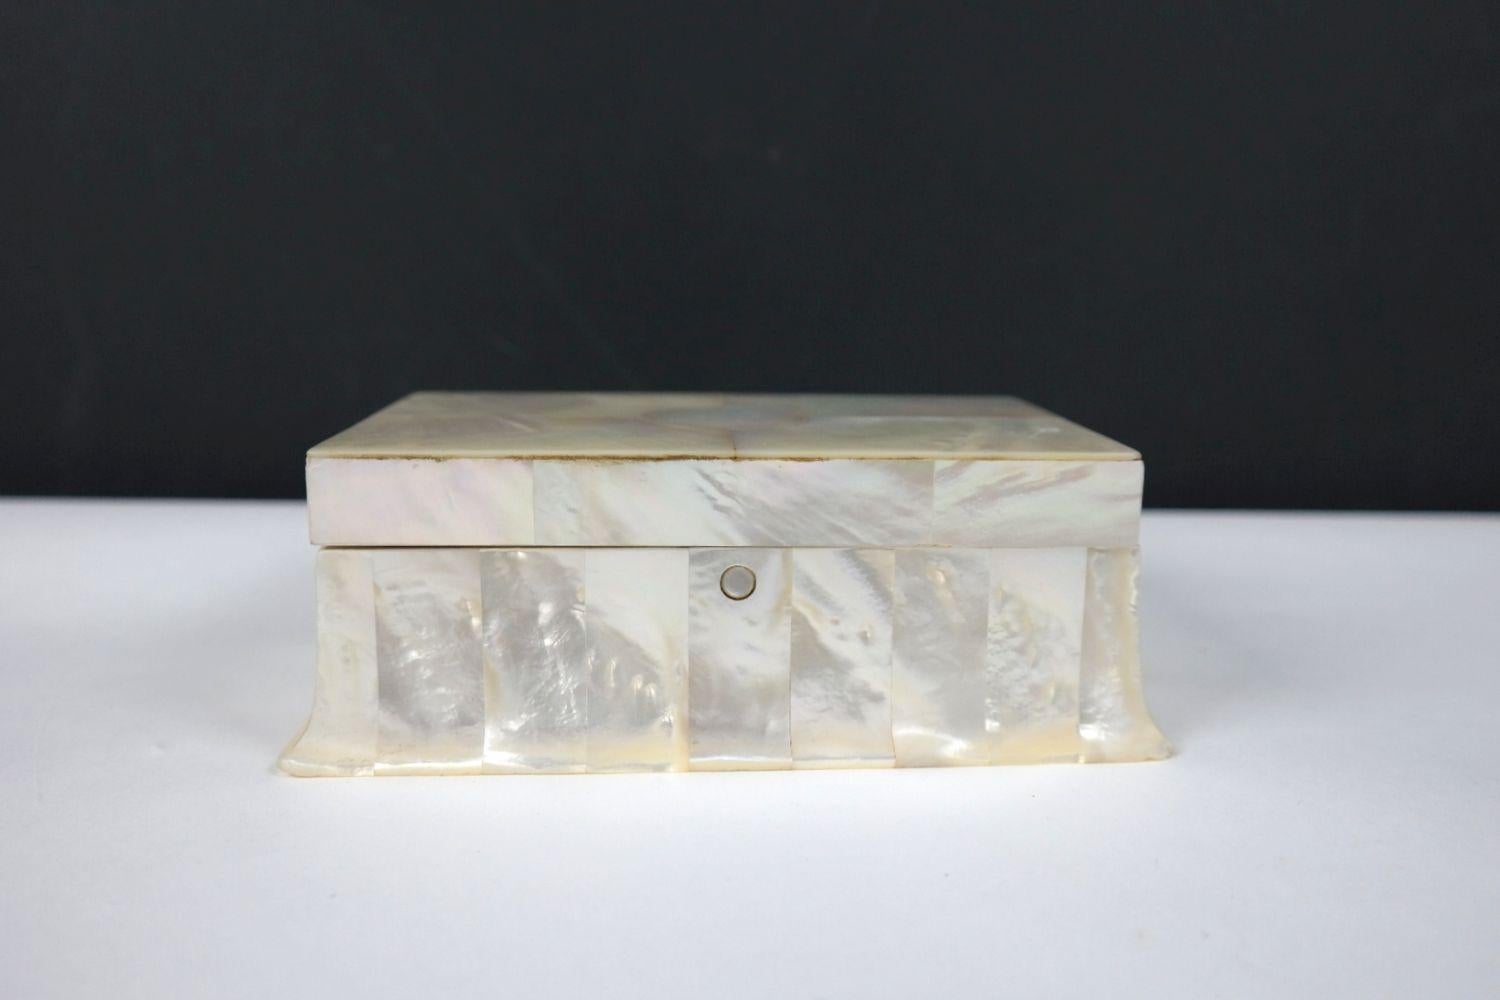 A rare, very beautiful mother-of-pearl box with an iridescent effect, suitable for storing jewelry, business cards, or even cigarettes, in the style of Austrian designer Josef Hoffmann.